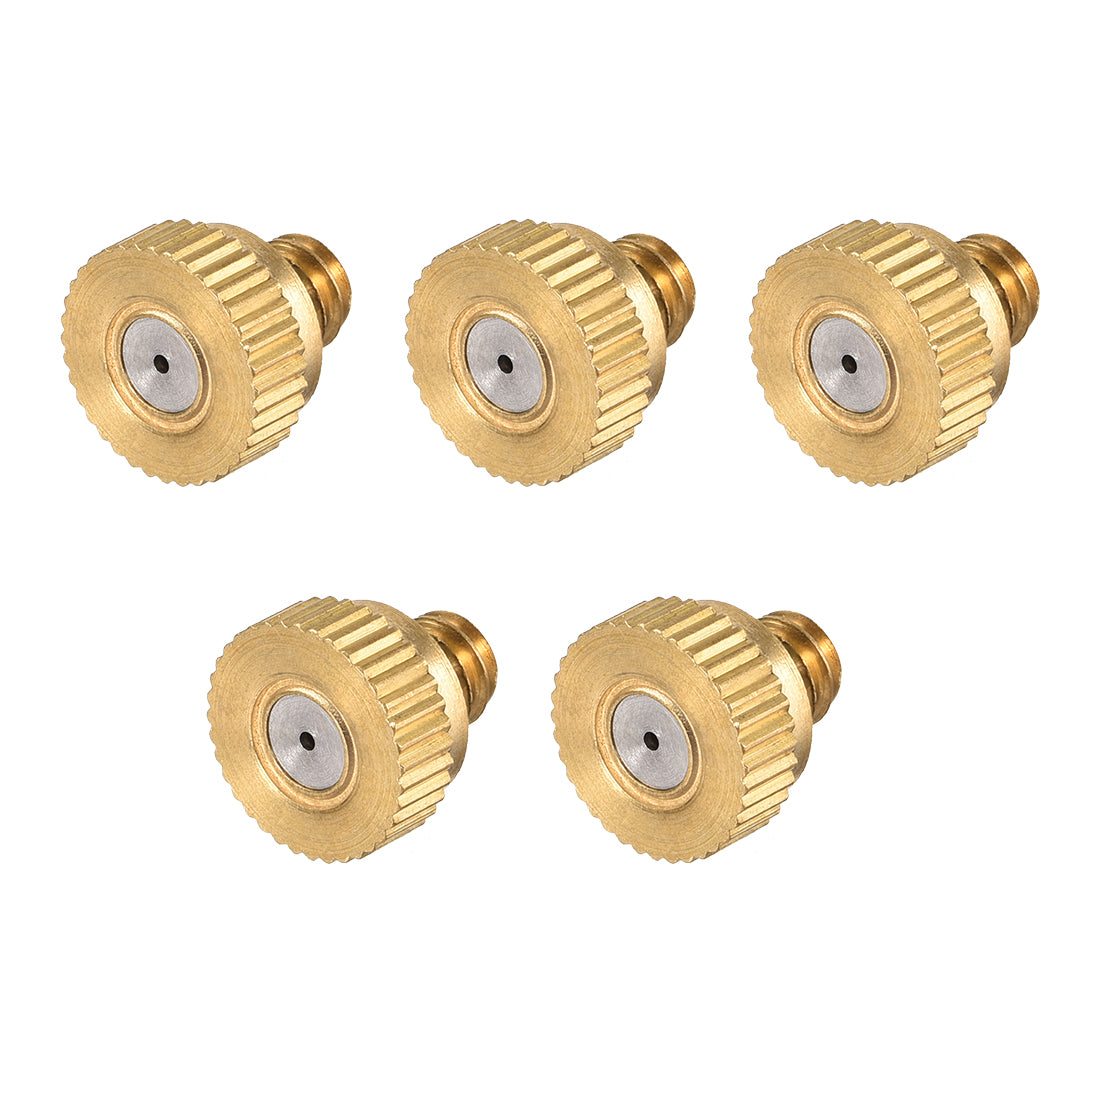 uxcell Uxcell Brass Misting Nozzle - 10/24 UNC Replacement Heads for Outdoor Cooling System - 5 Pcs